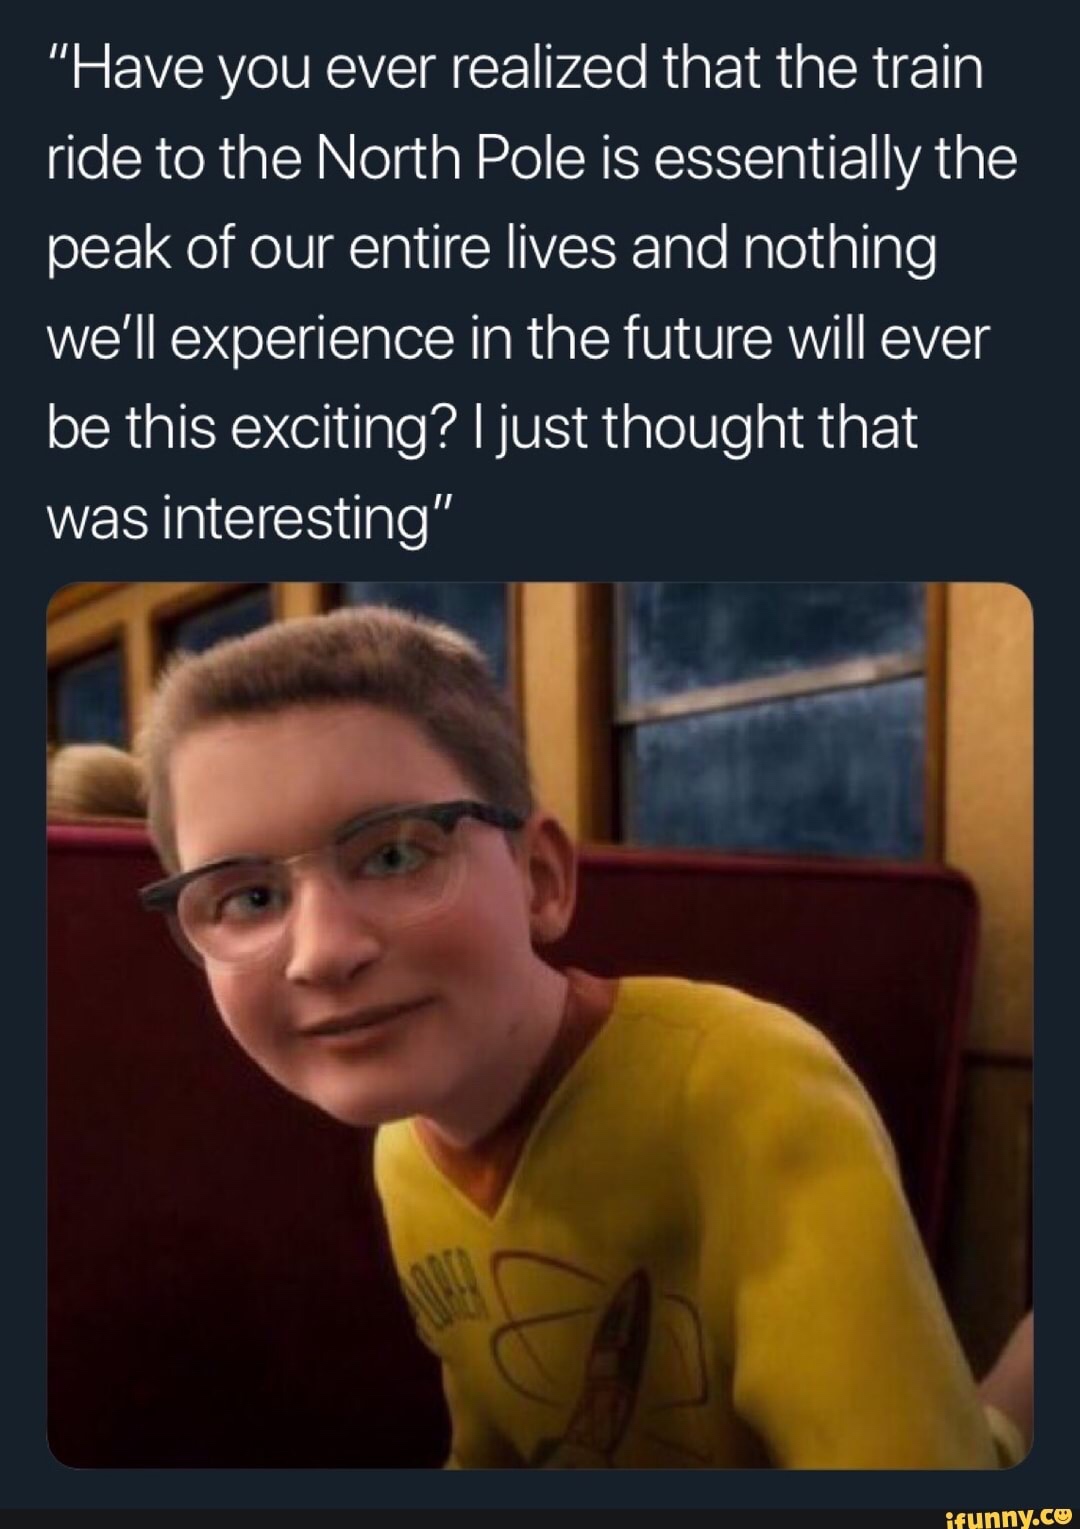 meme - polar express memes - "Have you ever realized that the train ride to the North Pole is essentially the peak of our entire lives and nothing we'll experience in the future will ever be this exciting? I just thought that was interesting" ifunny.co